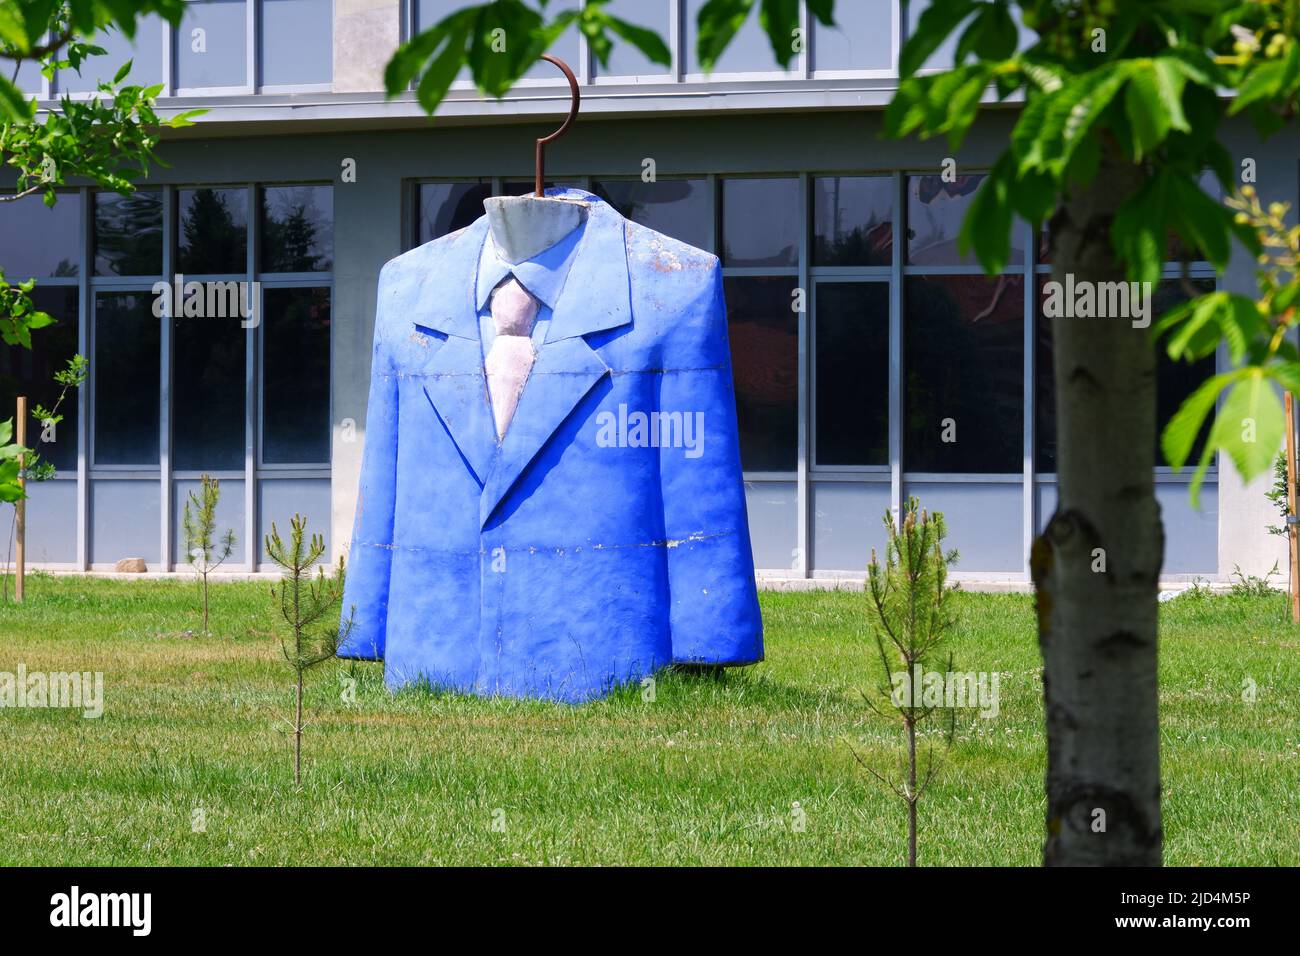 Statue of suit top with blue jacket, shirt and tie at garden of designing faculty in a sunny day Stock Photo